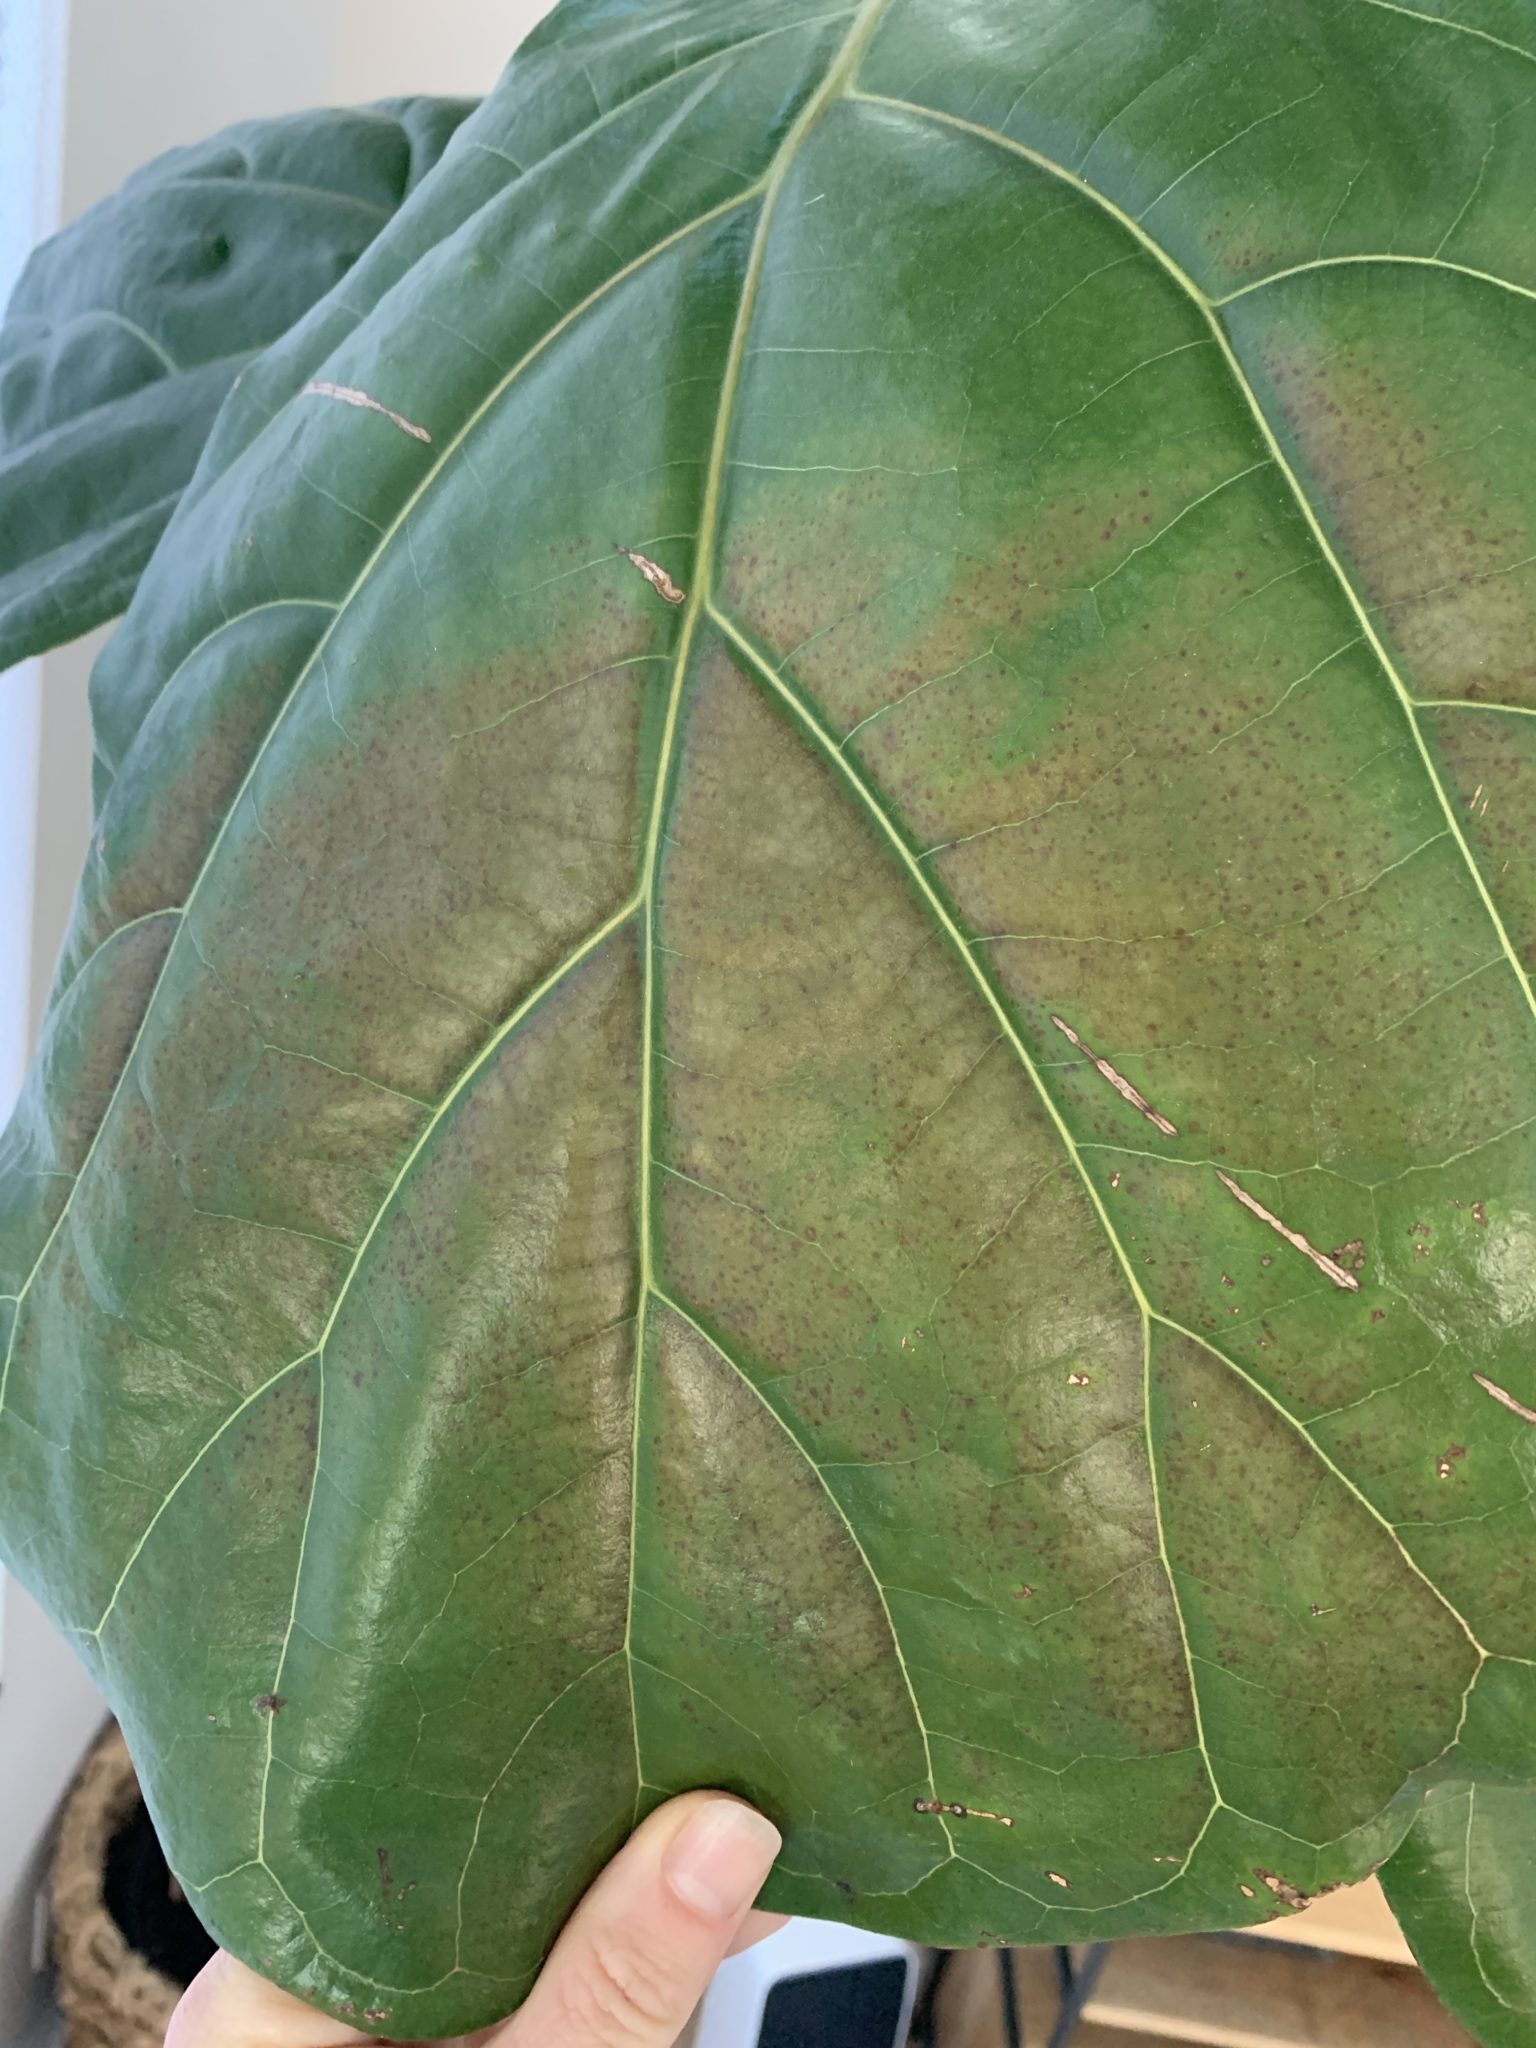 Top Heavy Brown Spots And Dry Spots The Fiddle Leaf Fig Plant Resource